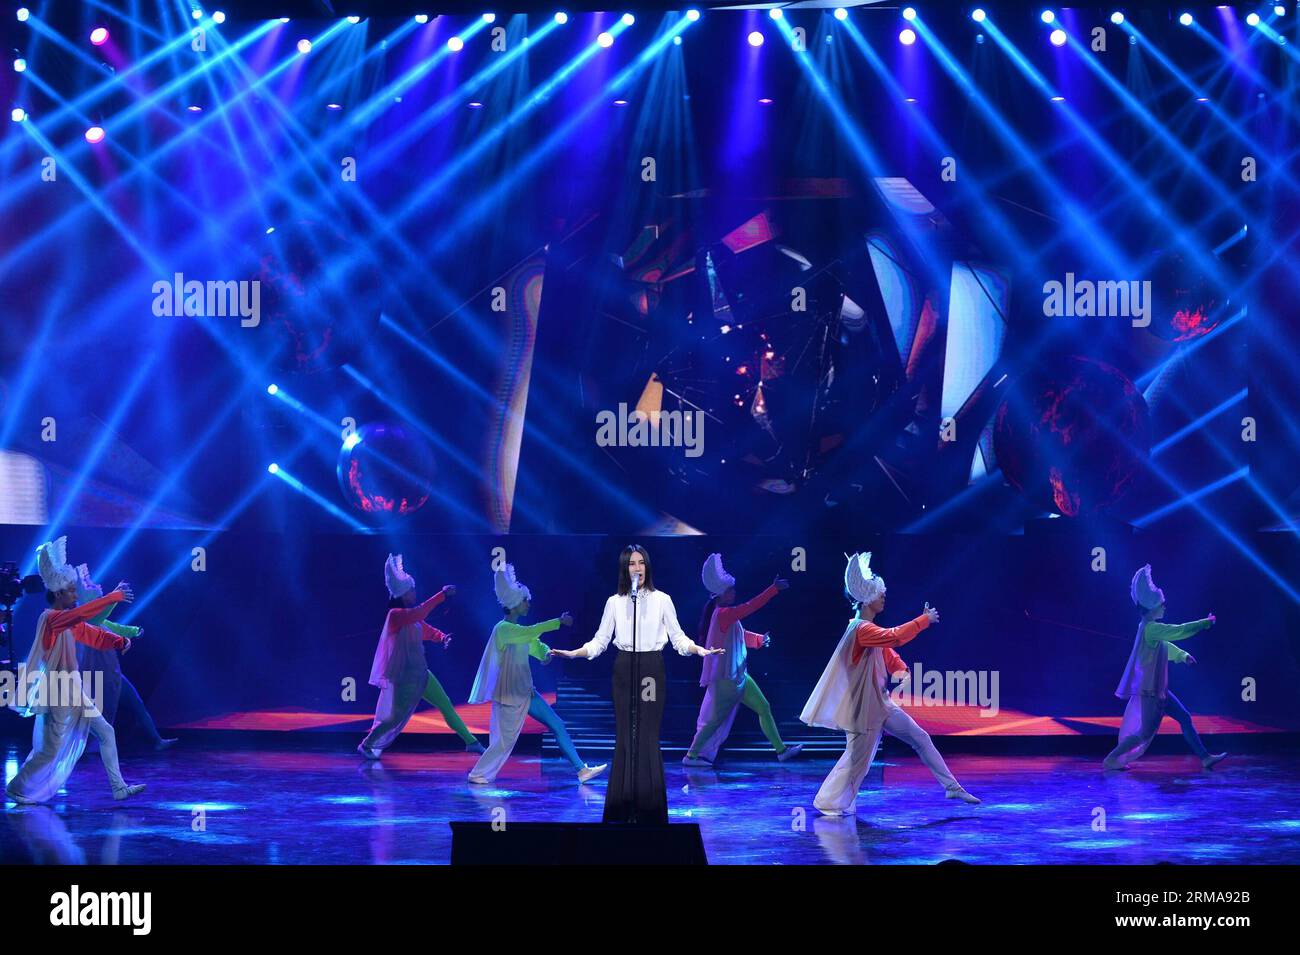 Singer Shang Wenjie performs during China Film New Power Commendation Ceremony in Beijing, capital of China, June 25, 2014. Ten young directors brought their new works to the ceremony. (Xinhua/Li Xin) (lfj) CHINA-BEIJING-CHINA FILM NEW POWER COMMENDATION CEREMONY (CN) PUBLICATIONxNOTxINxCHN   Singer Shang Wenjie performs during China Film New Power  Ceremony in Beijing Capital of China June 25 2014 ten Young Directors BROUGHT their New Works to The Ceremony XINHUA left Xin  China Beijing China Film New Power  Ceremony CN PUBLICATIONxNOTxINxCHN Stock Photo